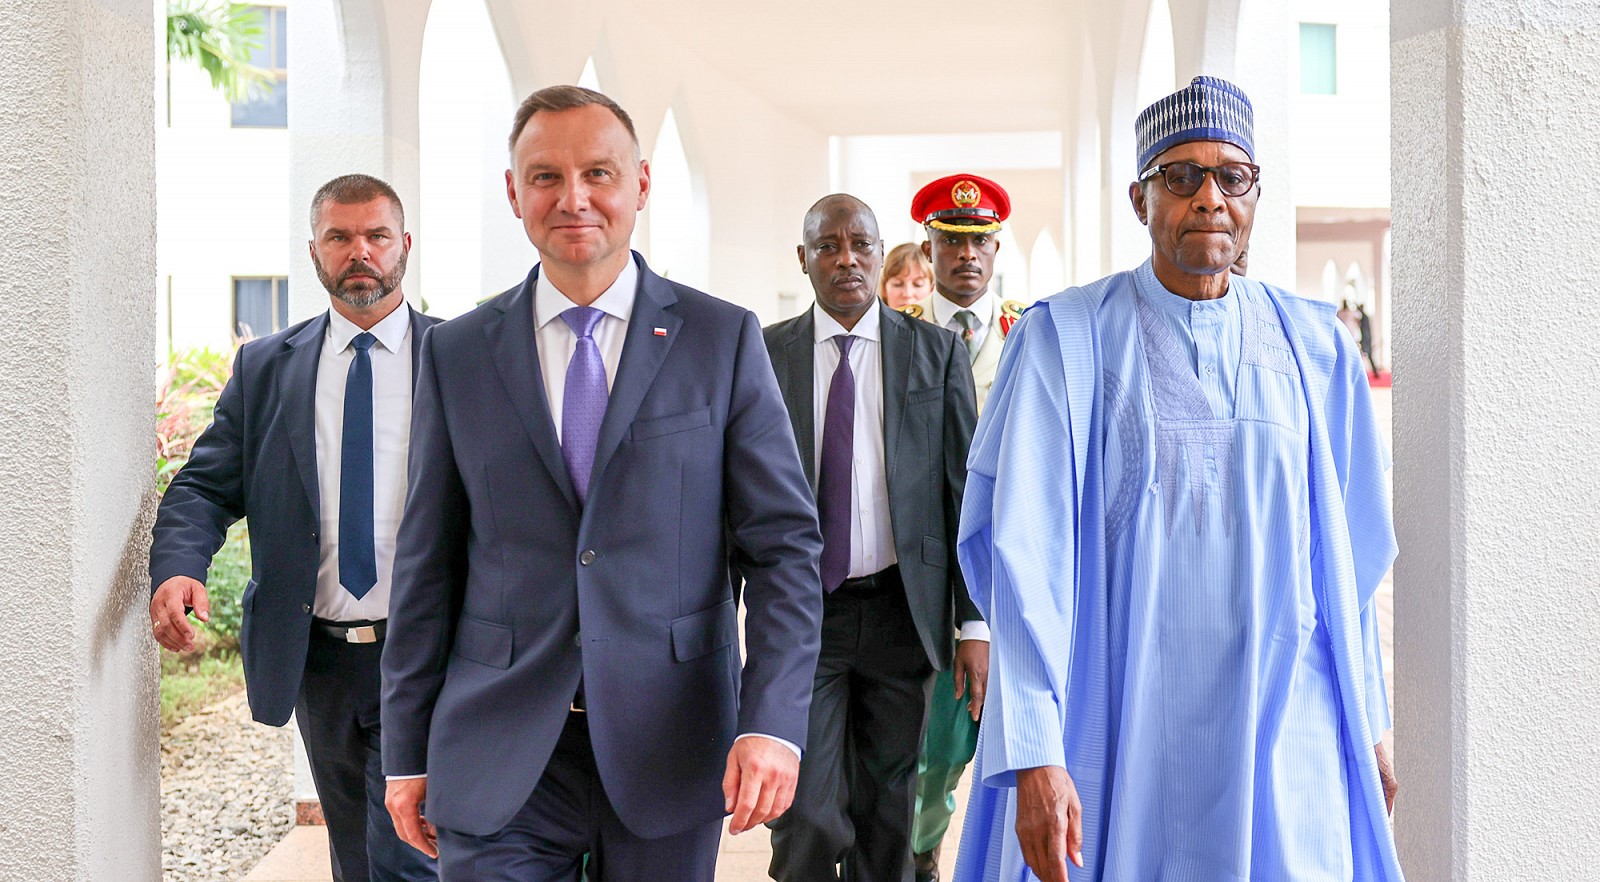 Nigerian President Muhammadu Buhari signed a deal with his Polish counterpart Andrzej Duda to supply LNG.